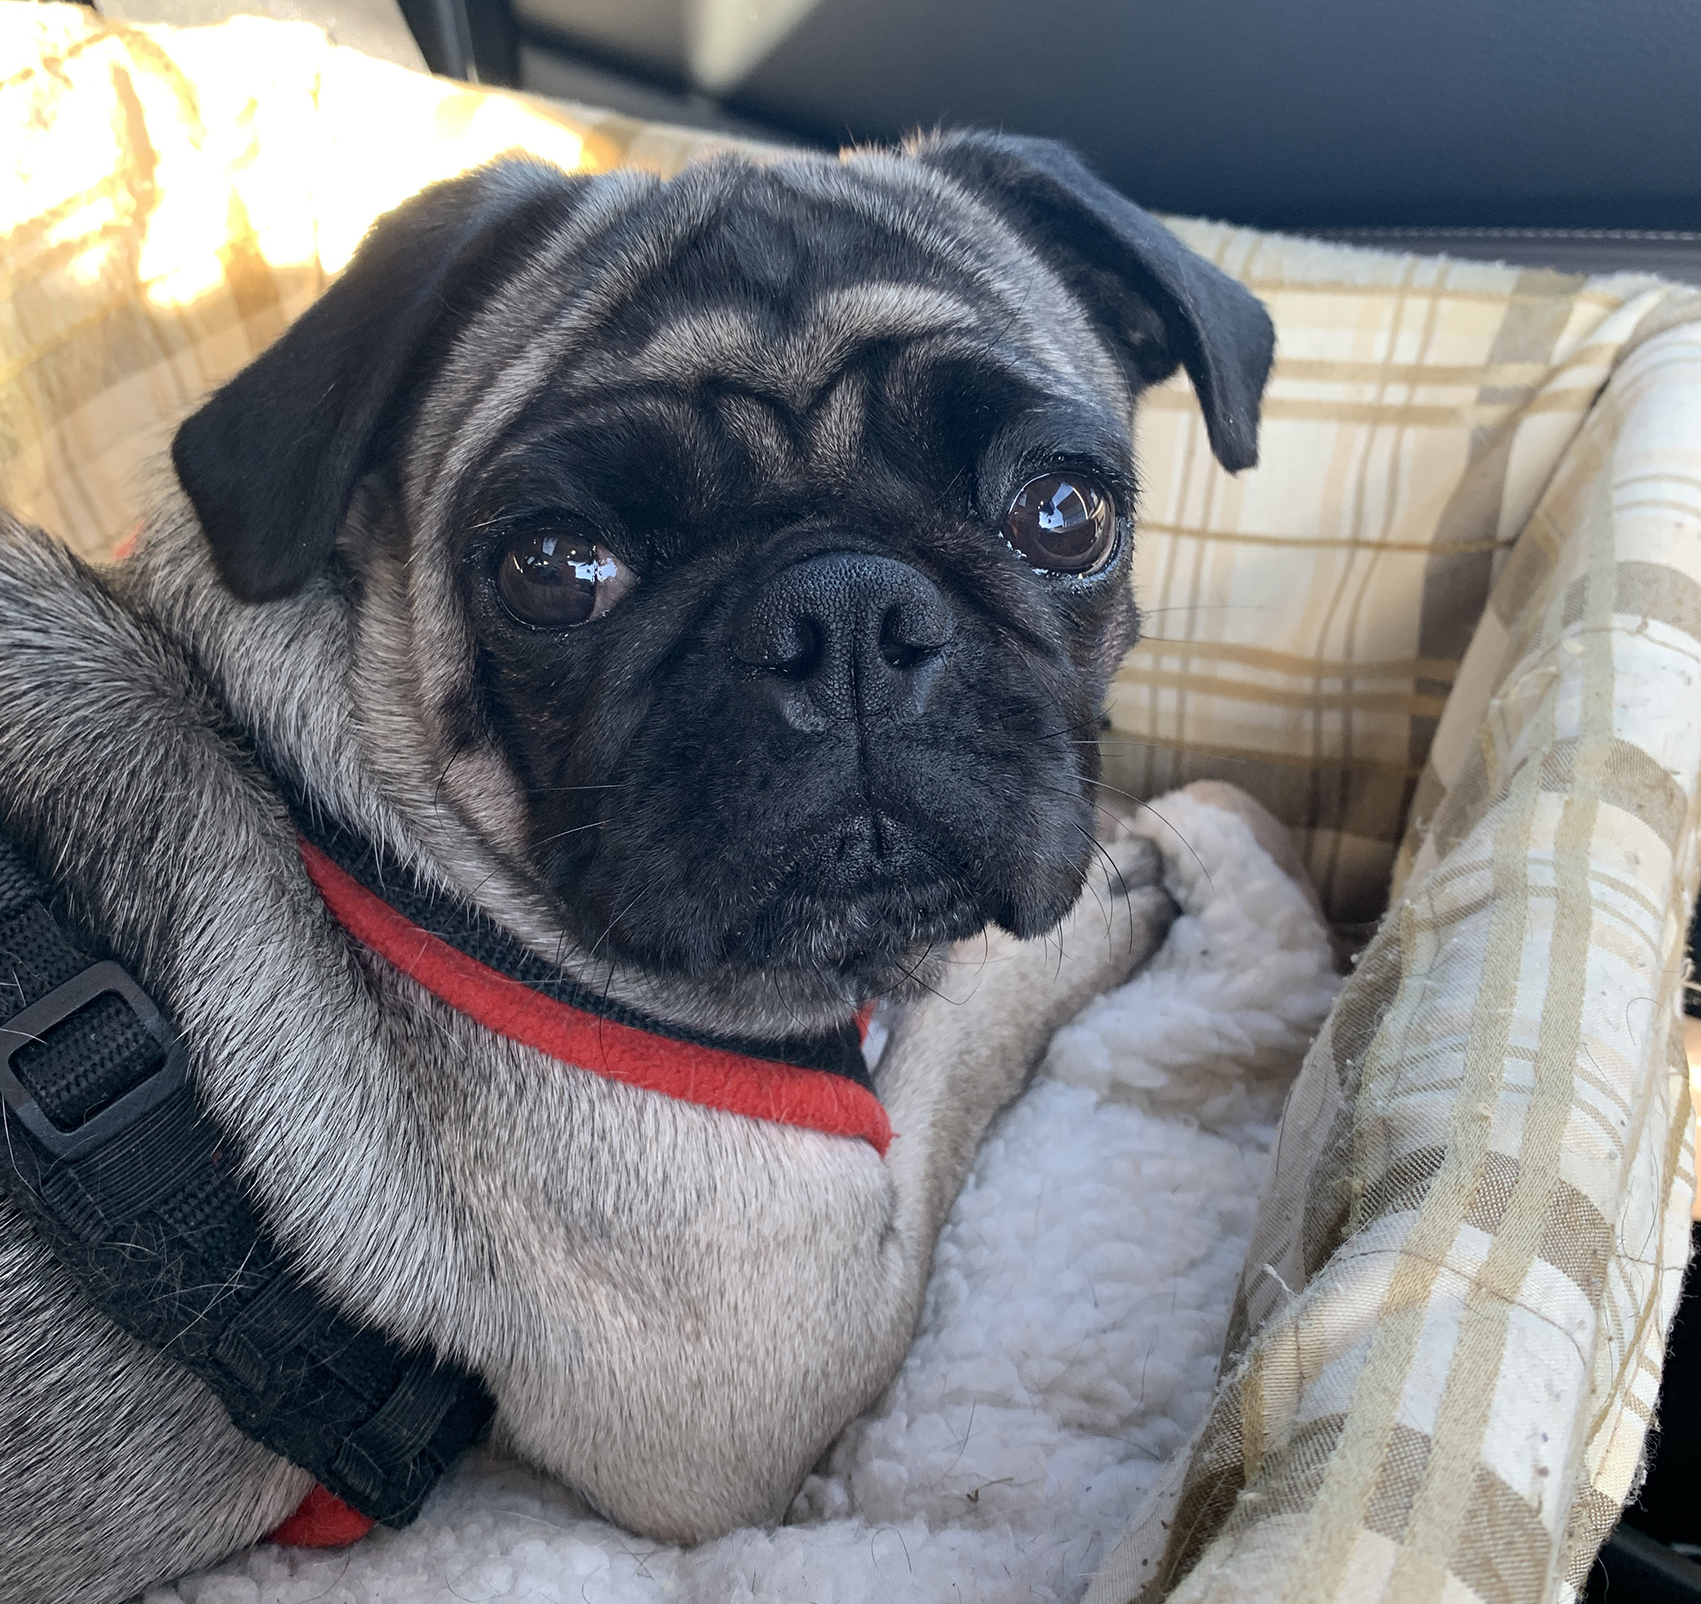 Wheels for Maisy - image Wilma on https://pugprotectiontrust.org